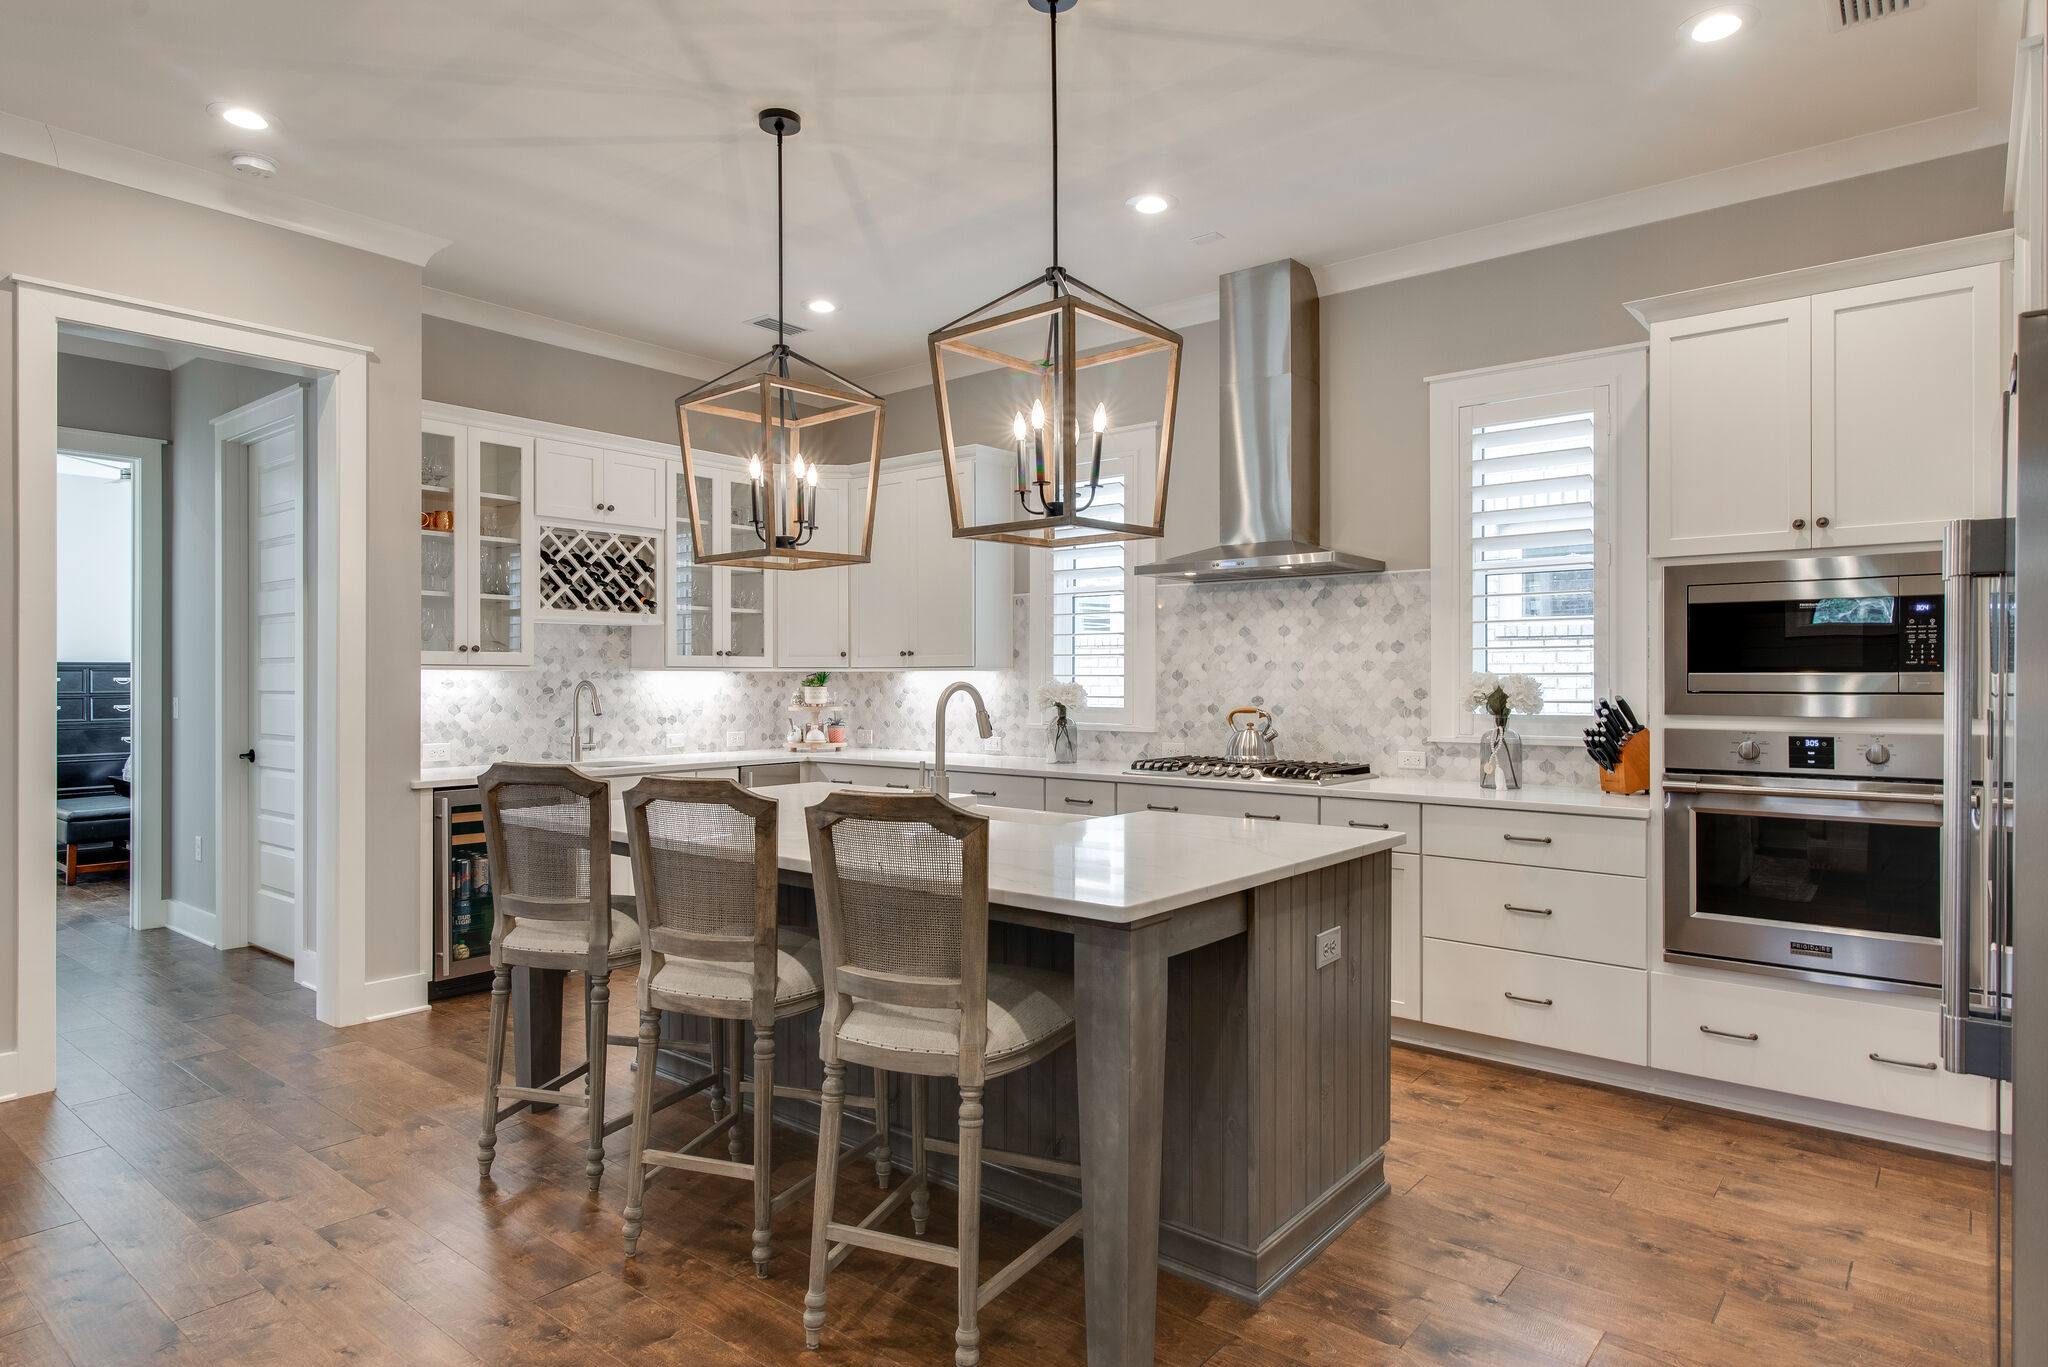 New Homes Media Gallery → Randy Wise Homes